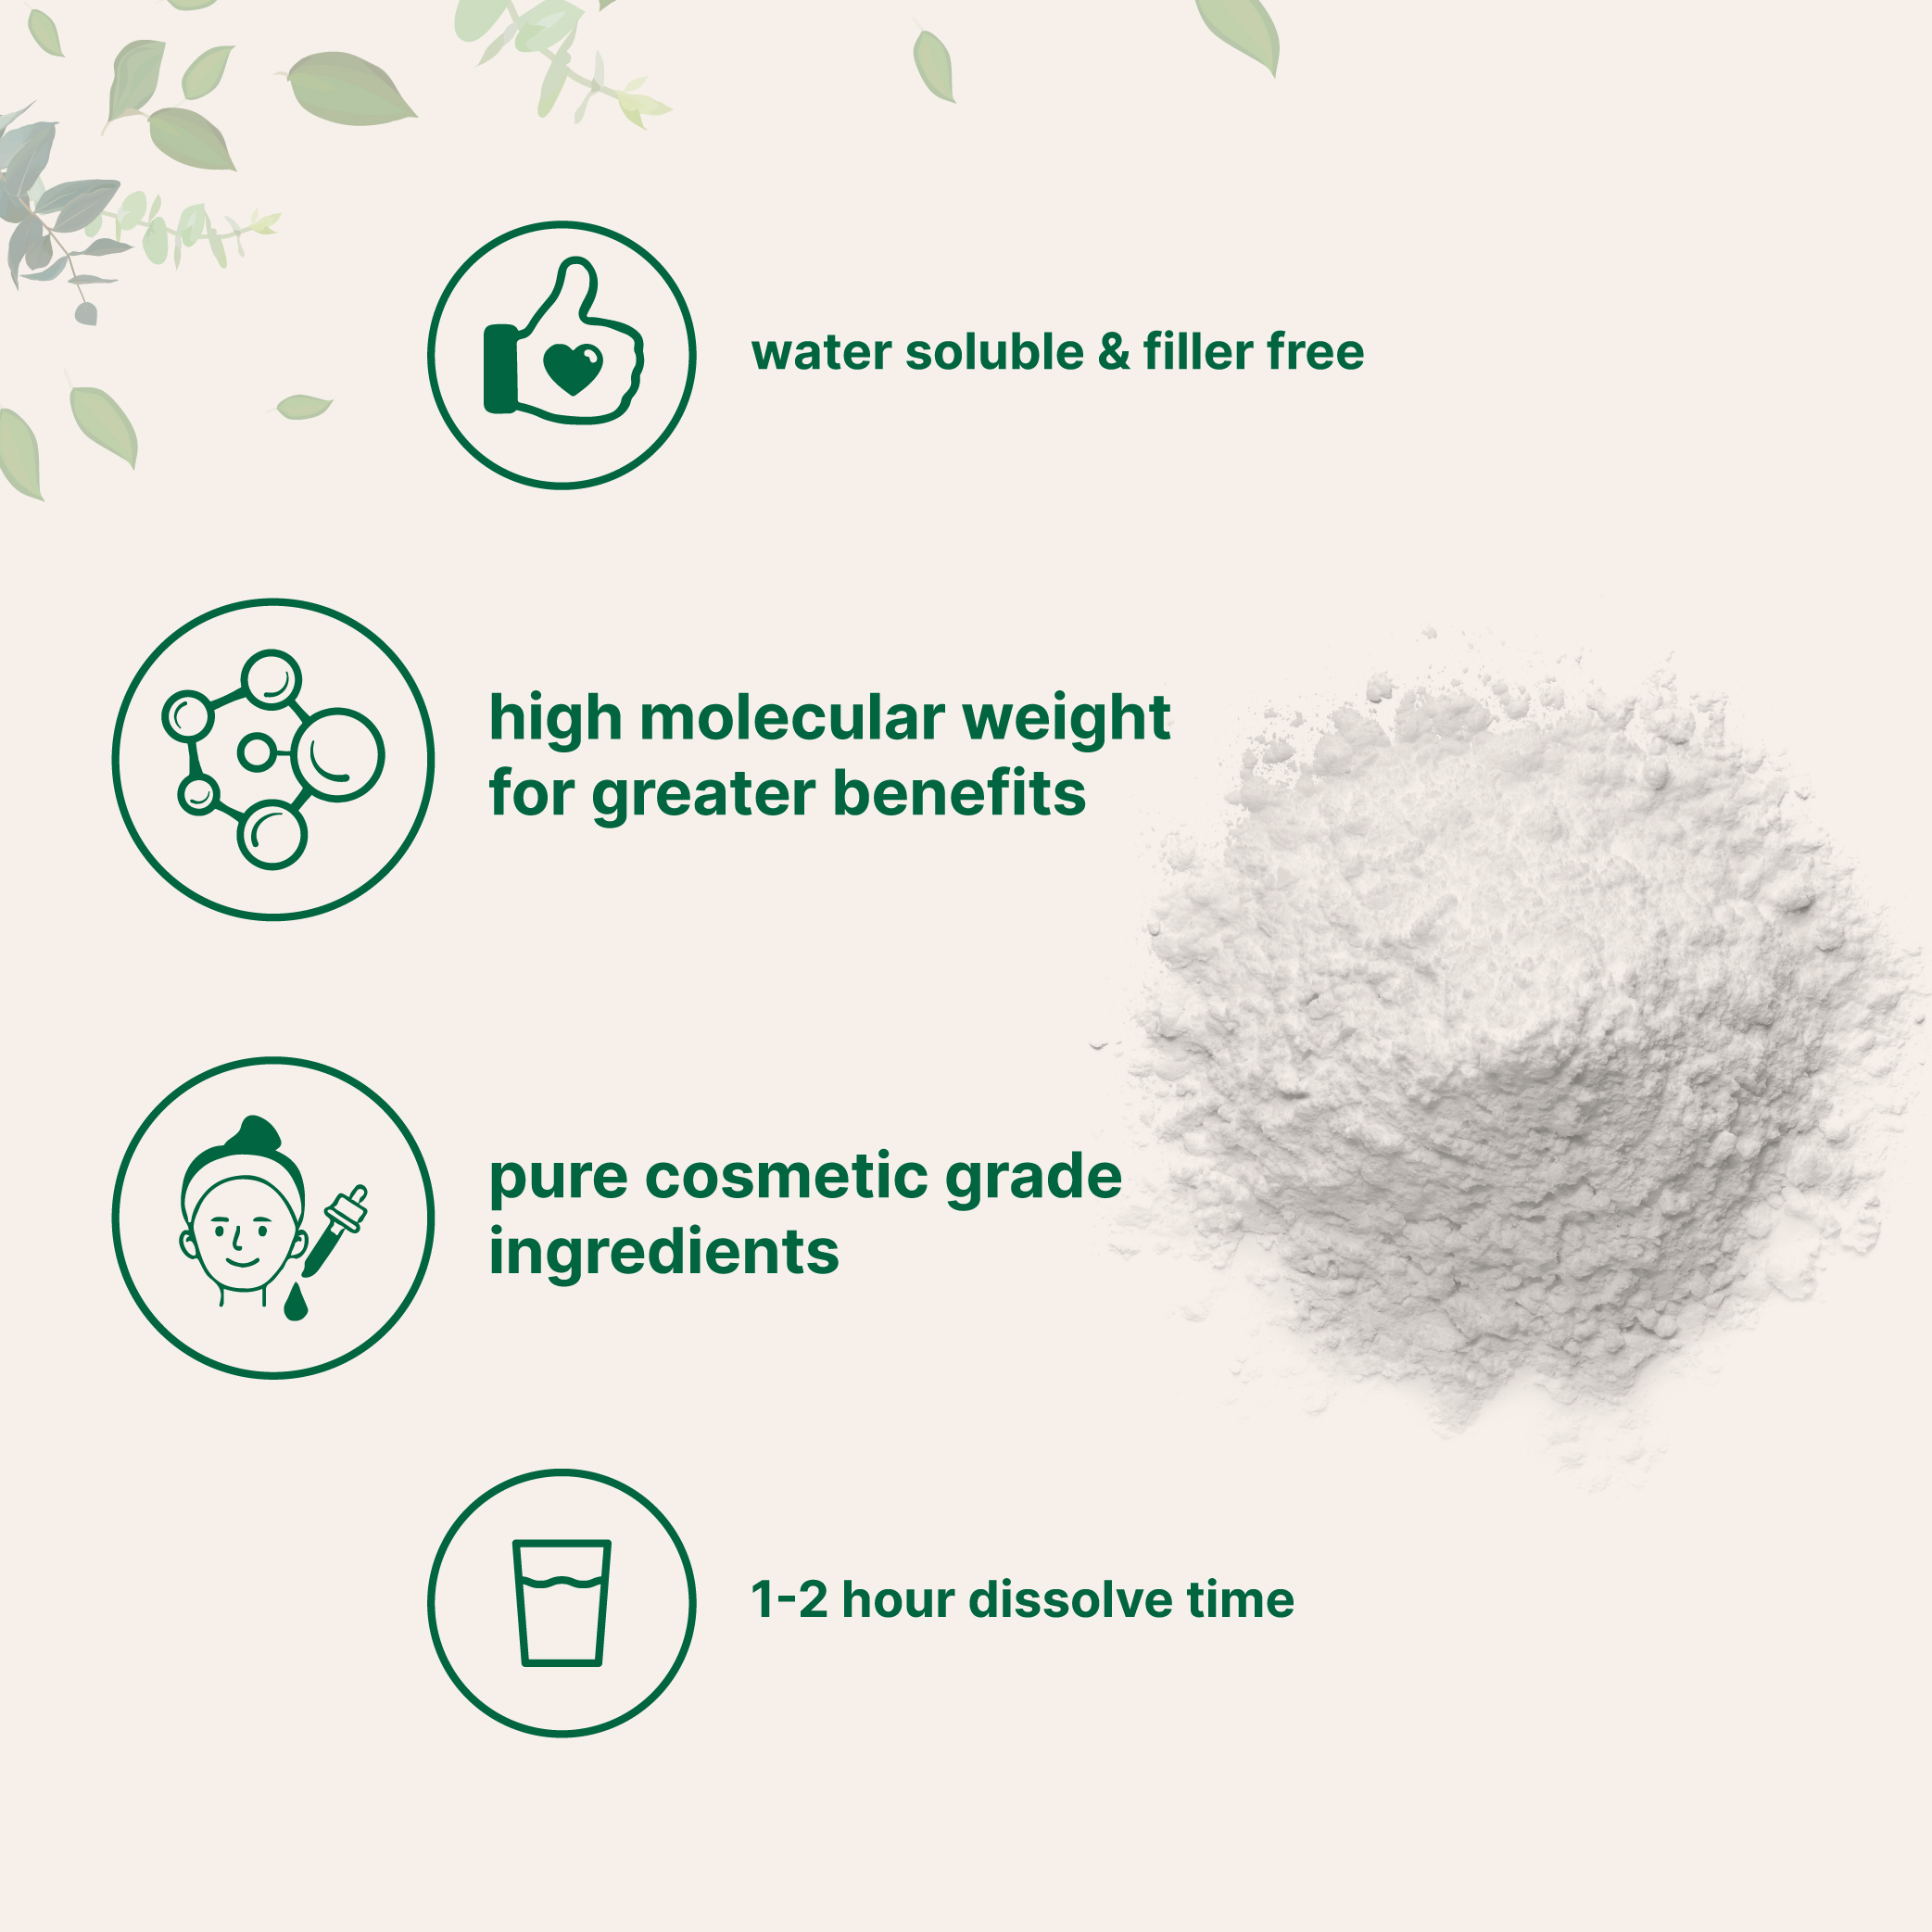 Premium Pure Hyaluronic Acid Powder for Making Anti-Aging Serum, Internal Hydration & Joint Health Support , 30 grams - image 3 of 6